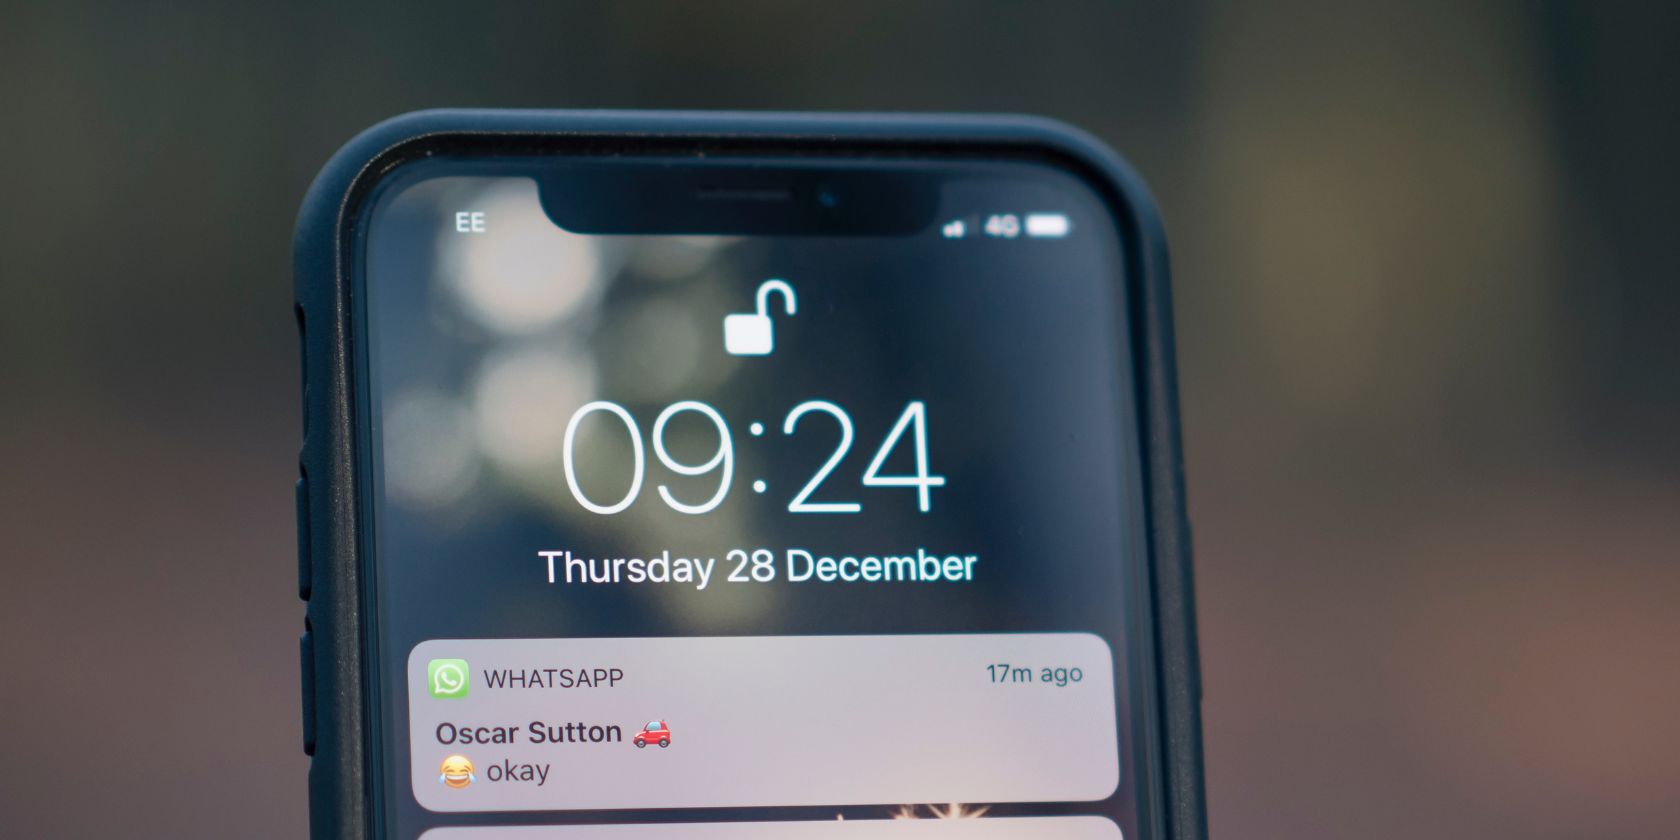 iPhone unlocked using Face ID with a WhatsApp notification